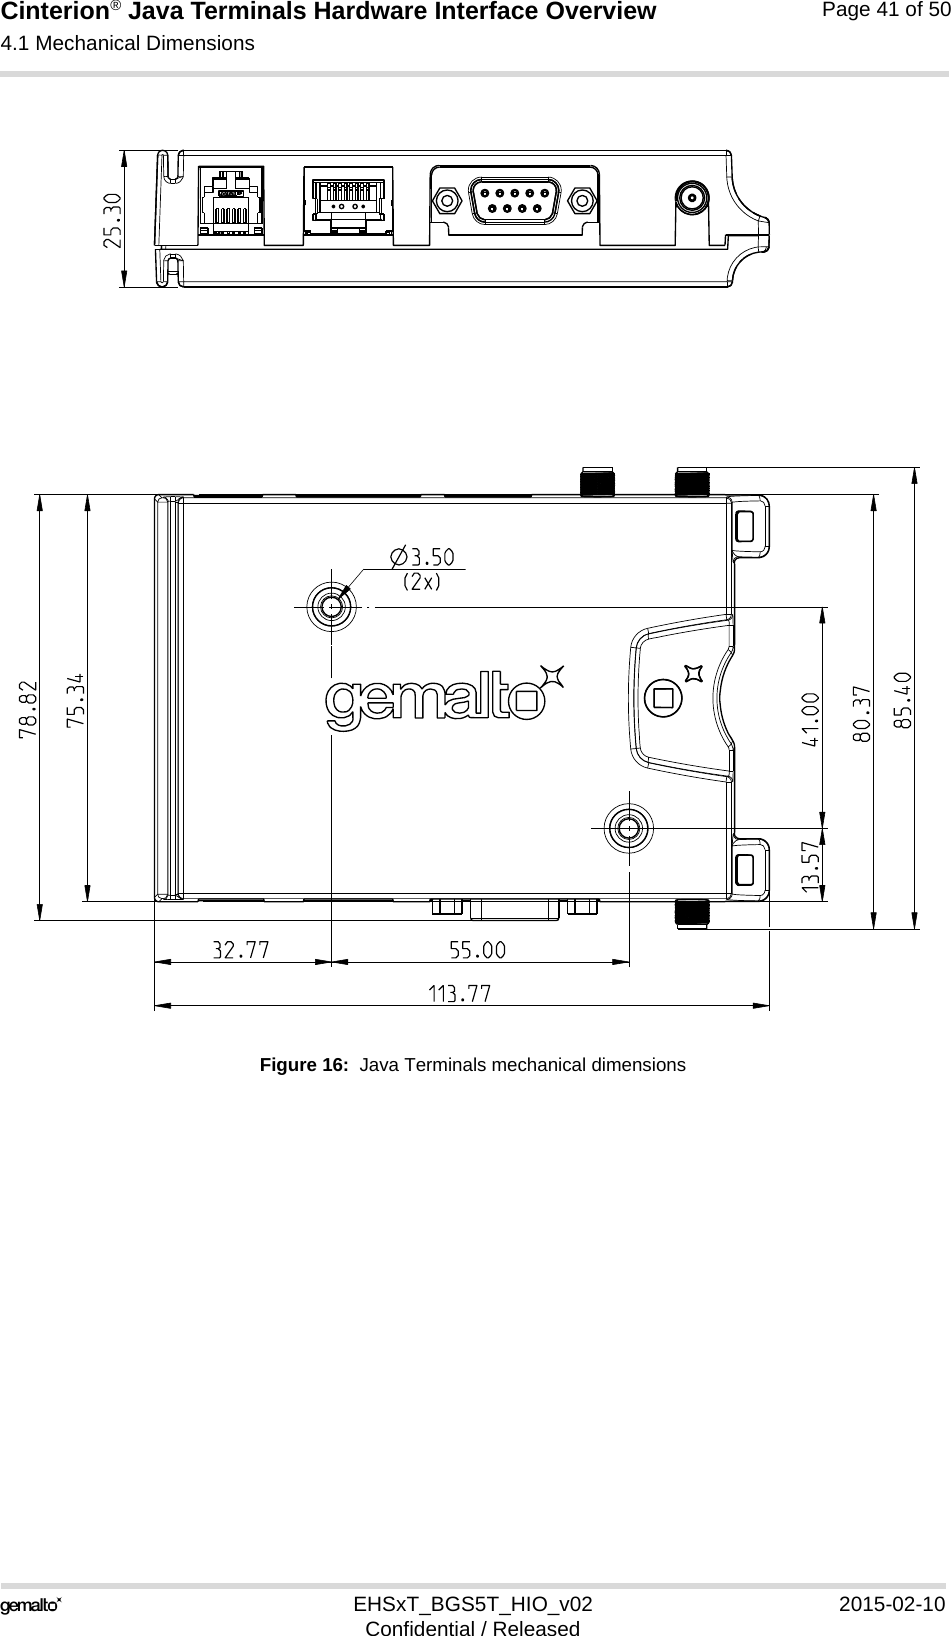 Cinterion® Java Terminals Hardware Interface Overview4.1 Mechanical Dimensions44EHSxT_BGS5T_HIO_v02 2015-02-10Confidential / ReleasedPage 41 of 50Figure 16:  Java Terminals mechanical dimensions